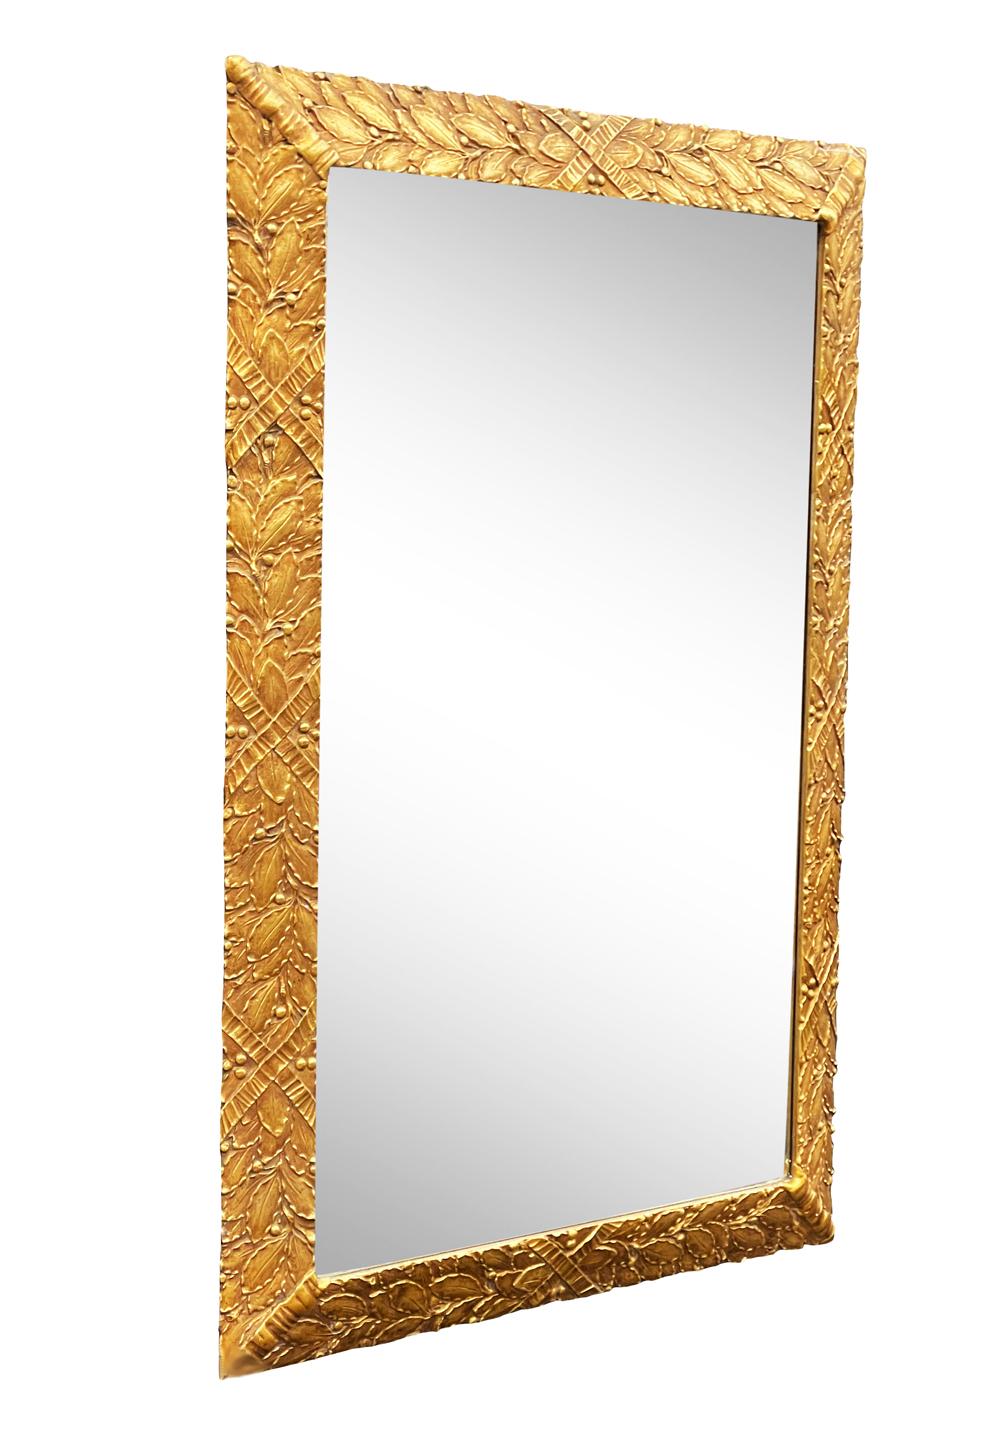 Hollywood Regency Large Italian Rectangular Mirror in Gold Gilded Carved Wood For Sale 3